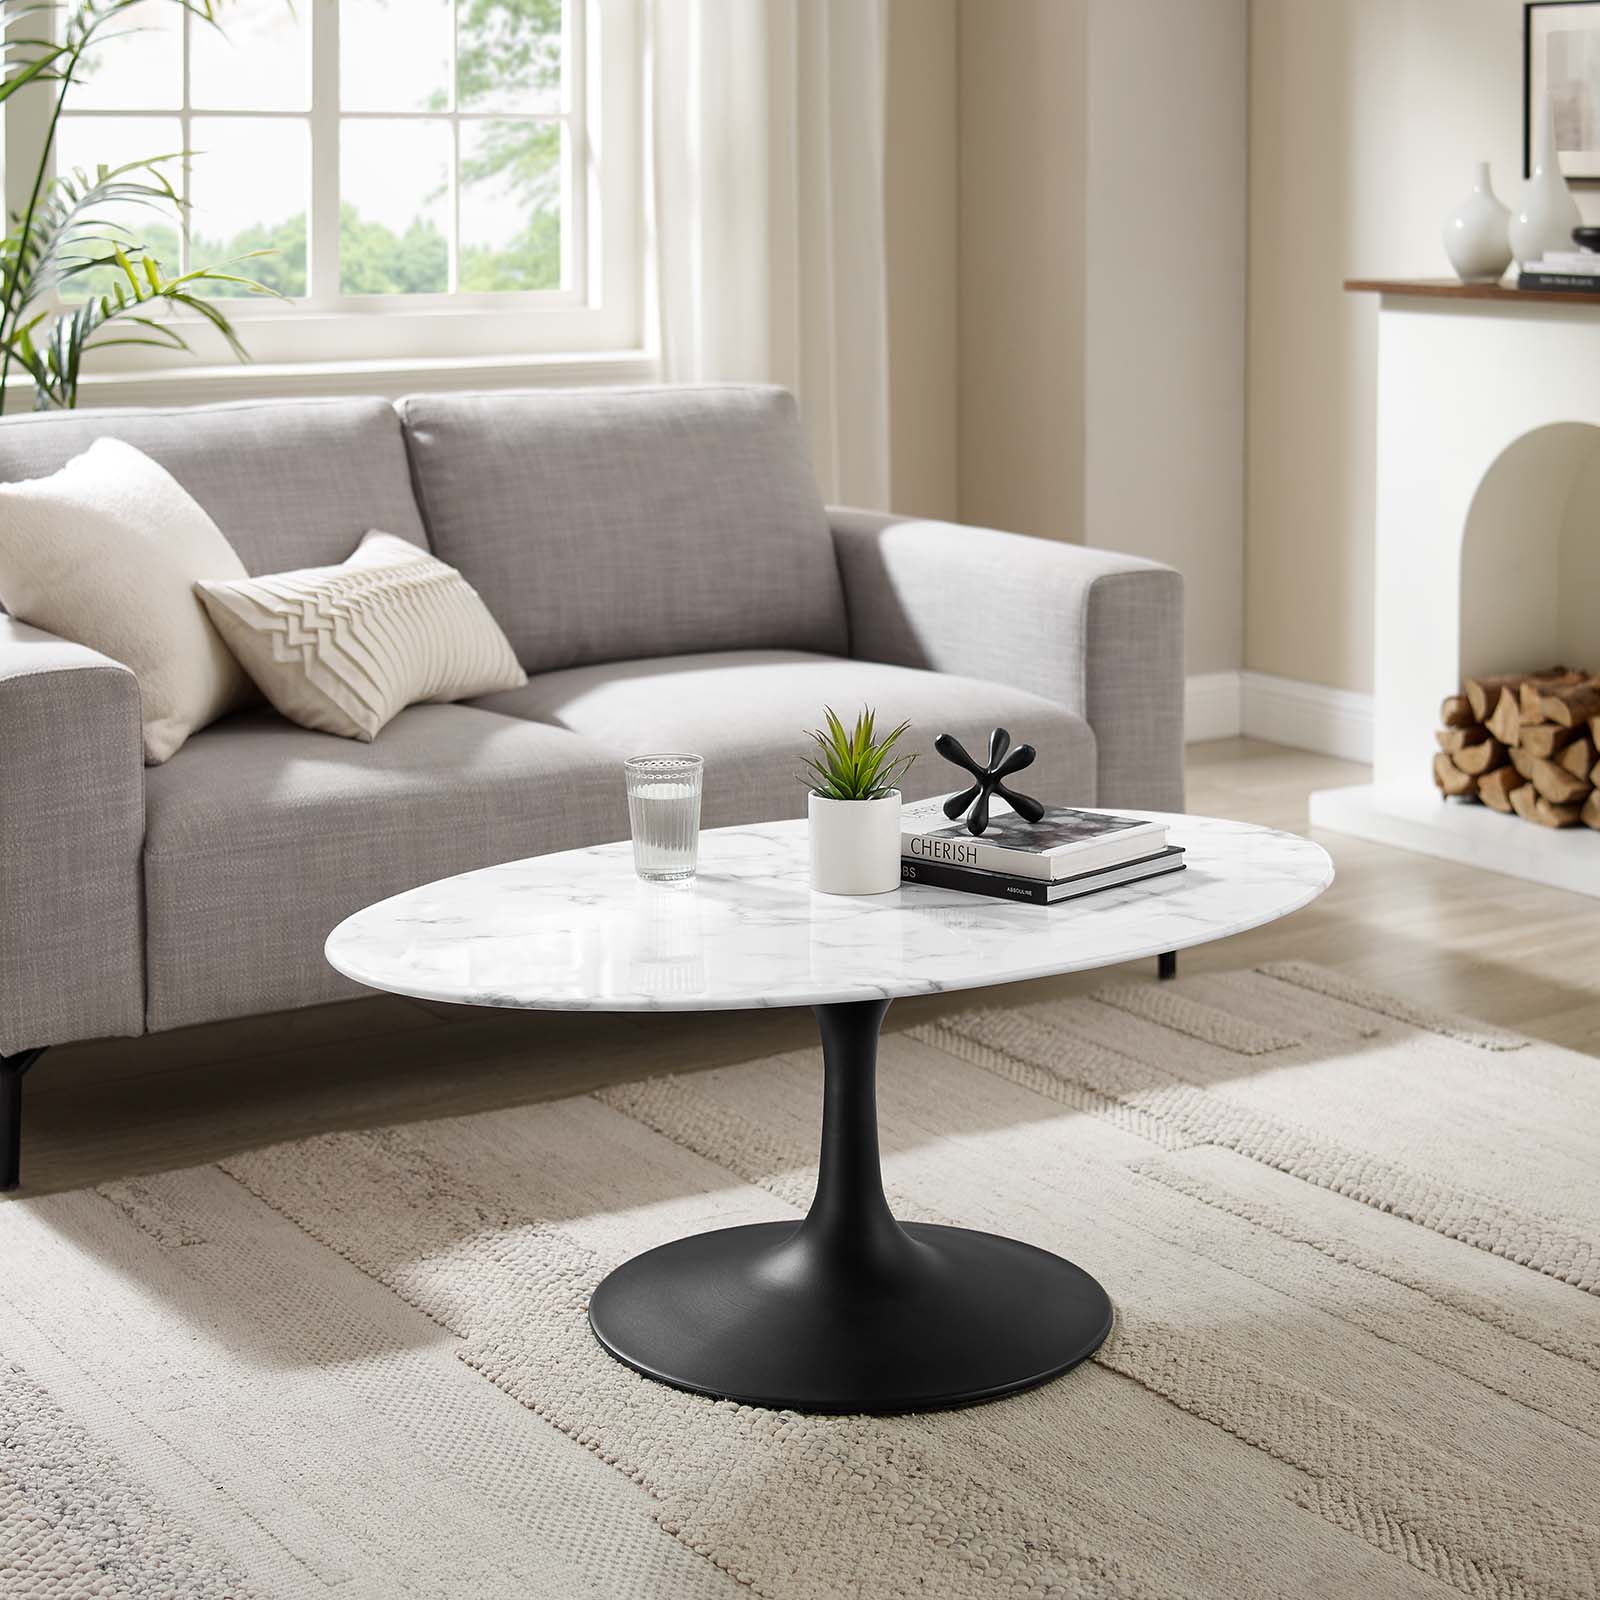 Lippa 42" Oval-Shaped Artificial Marble Coffee Table - East Shore Modern Home Furnishings